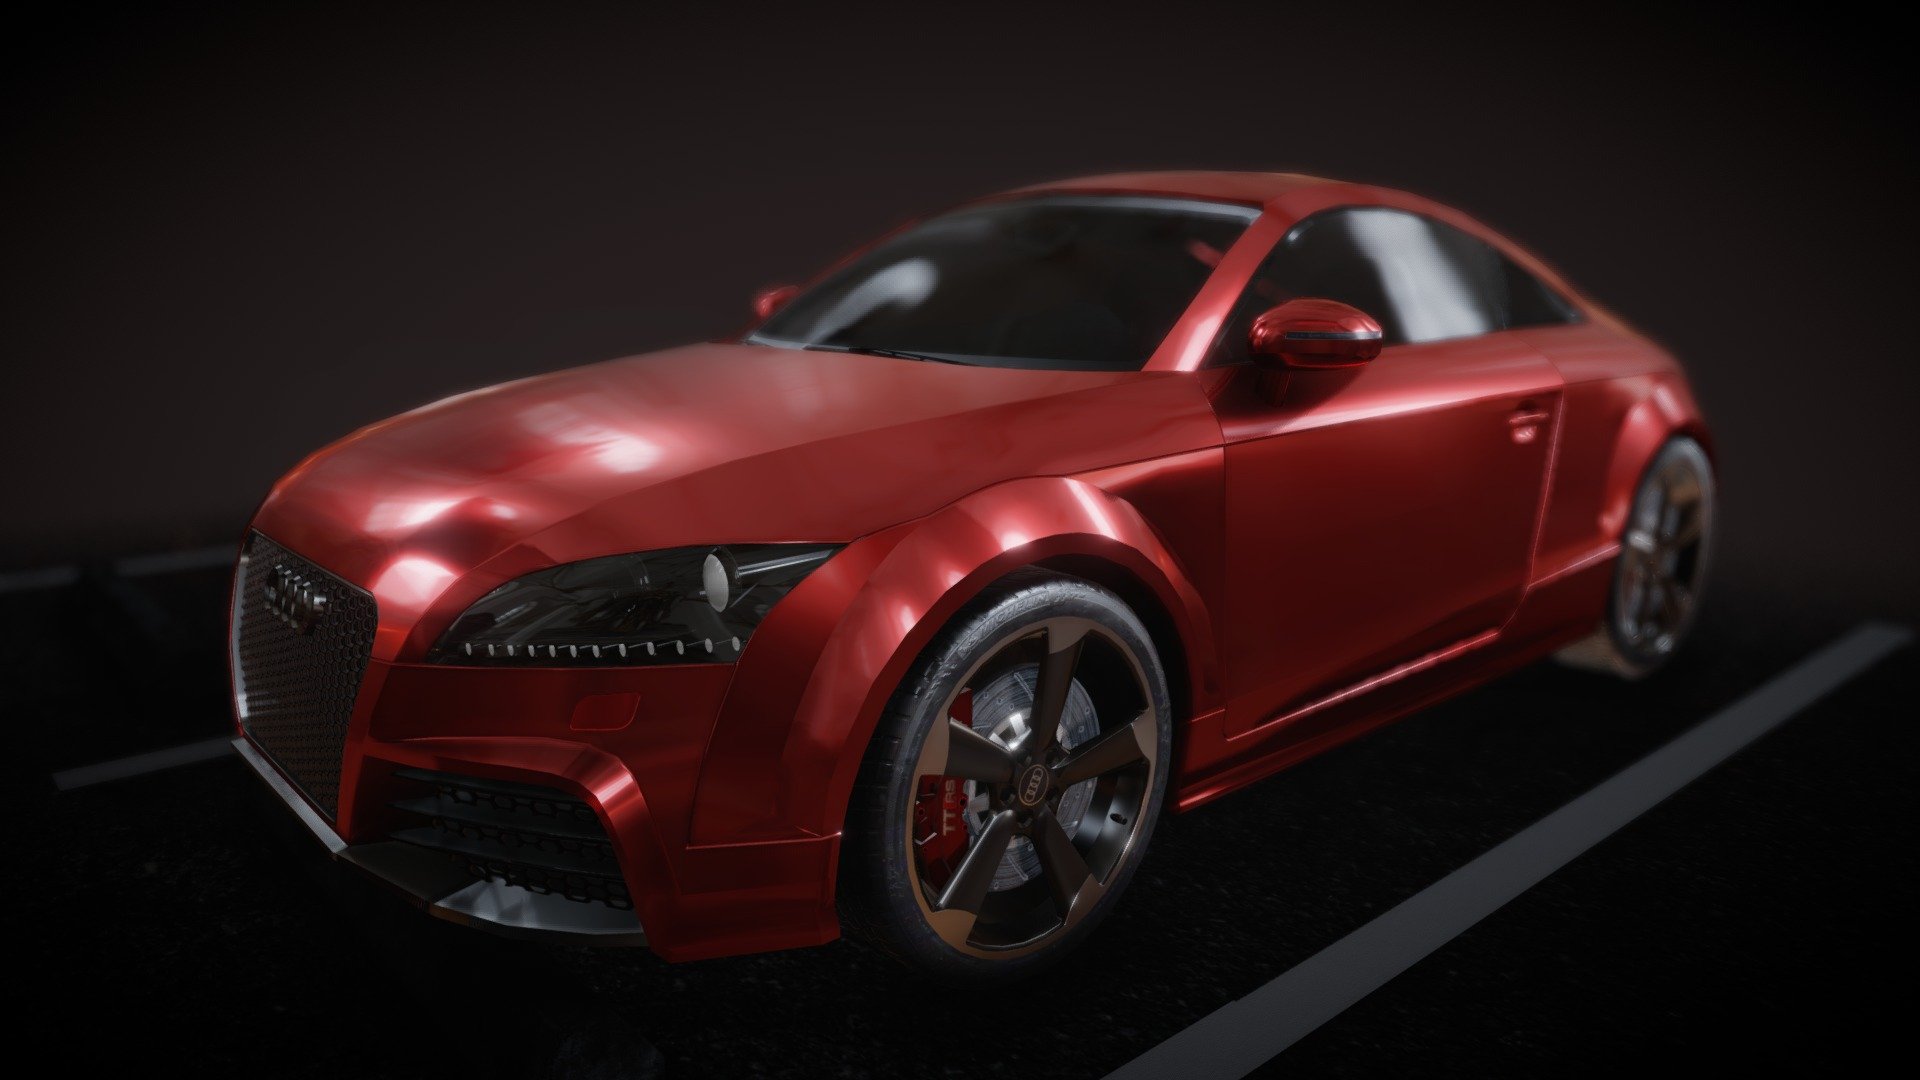 For freelance (I model what you need for payment) or any other questions, contact me directly:

Discord: Tigr#1545

low poly (~39k polys)  Audi TT RS 2013 model. I have spent almost 3 weeks to make it (2 of fhem to optimize).

https://www.artstation.com/artwork/58qaYE - AUDI TT RS 2013 [low-poly] - Buy Royalty Free 3D model by TGRRRR 3d model